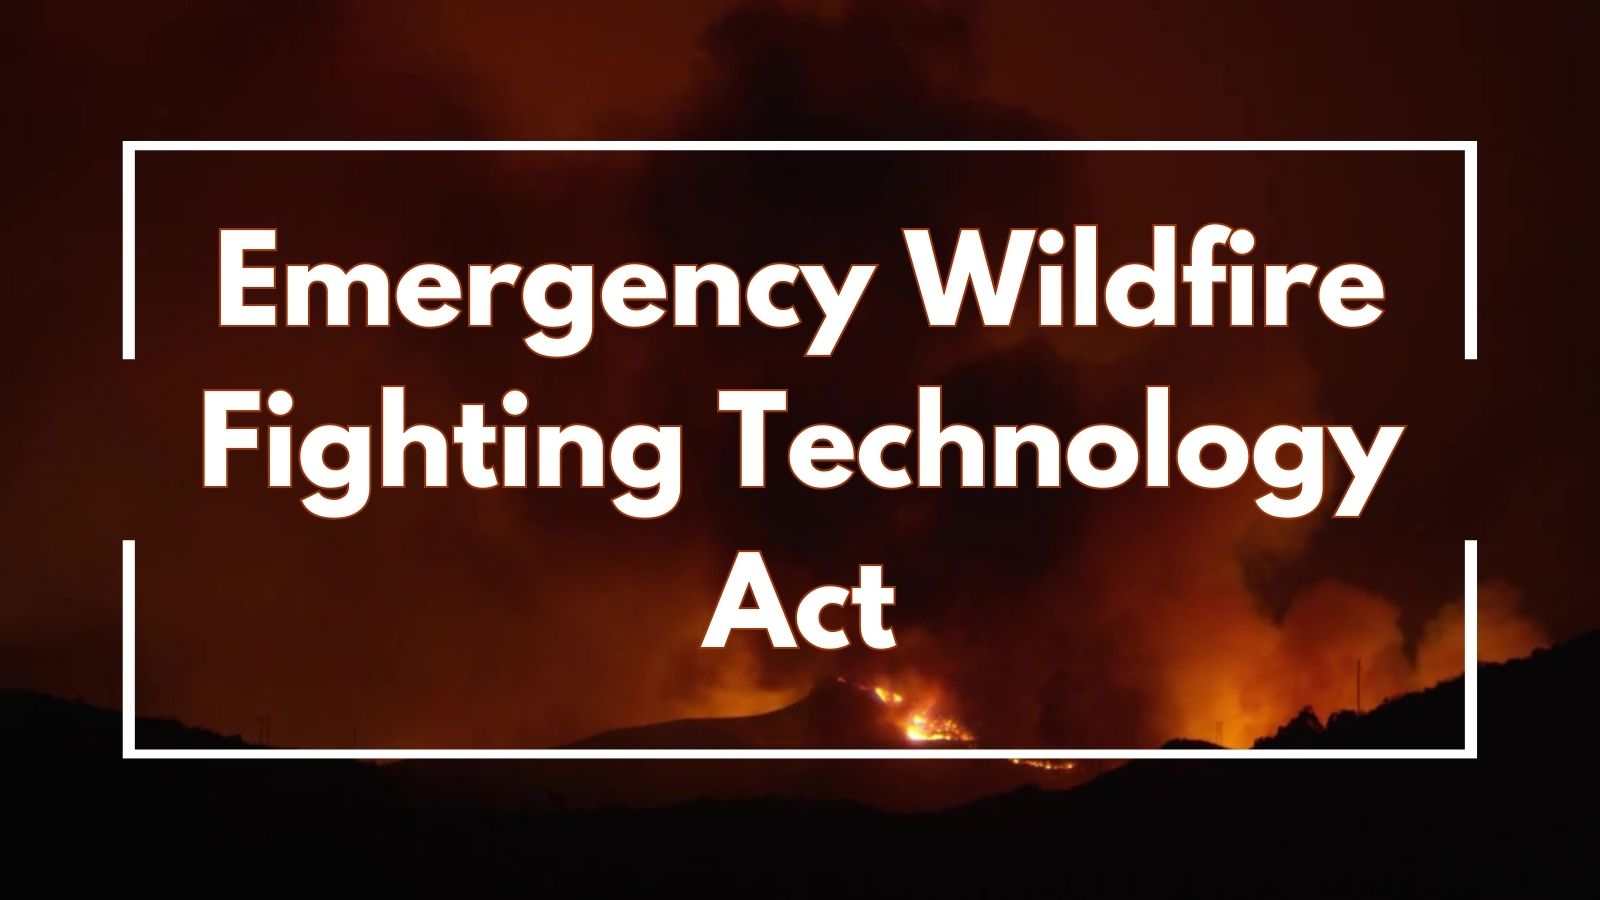 Rep. Valadao introduces Emergency Wildfire Fighting Technology Act